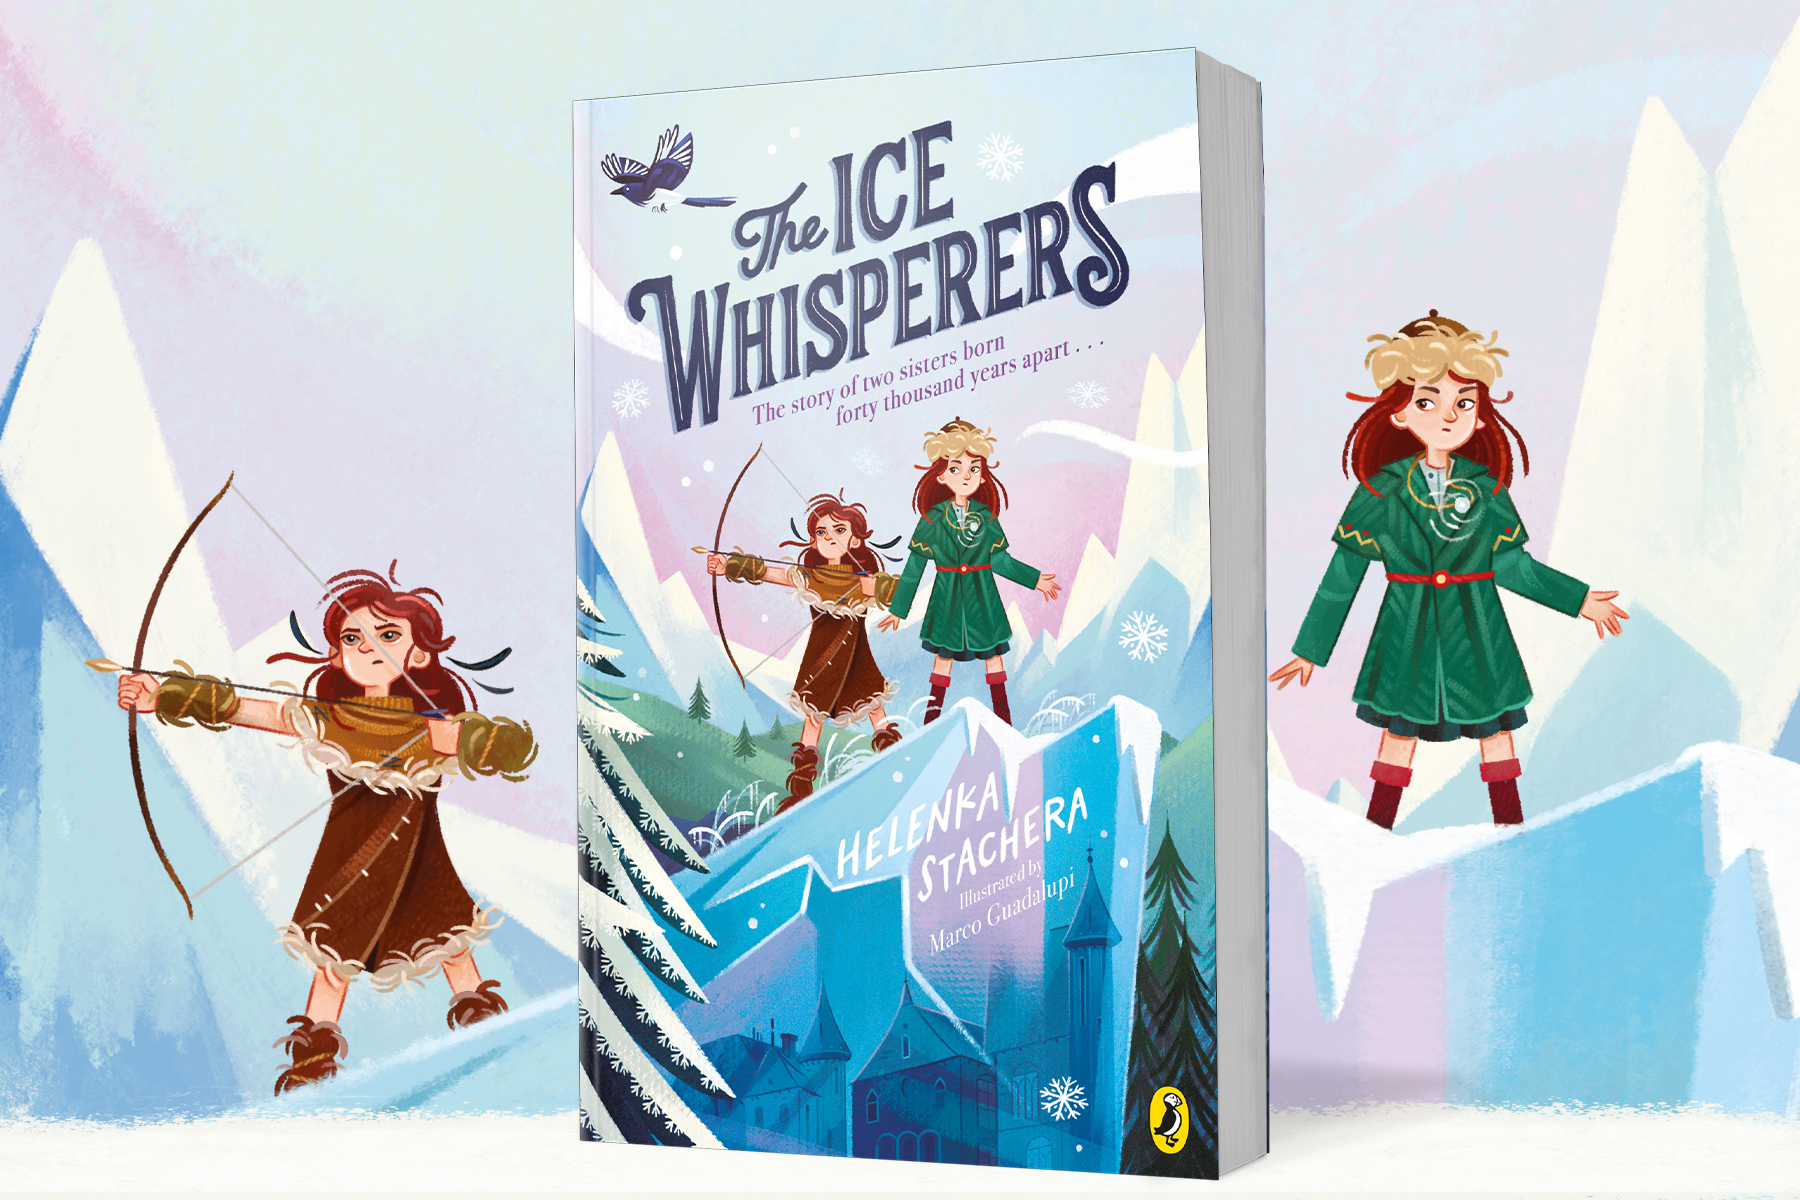 A picture featuring the book The Ice Whisperers by Helenka Stachera. The background is an illustration from the front cover and shows the two main characters Bela and Ra-ya standing against a snowy landscape. One of them holds a bow and arrow.